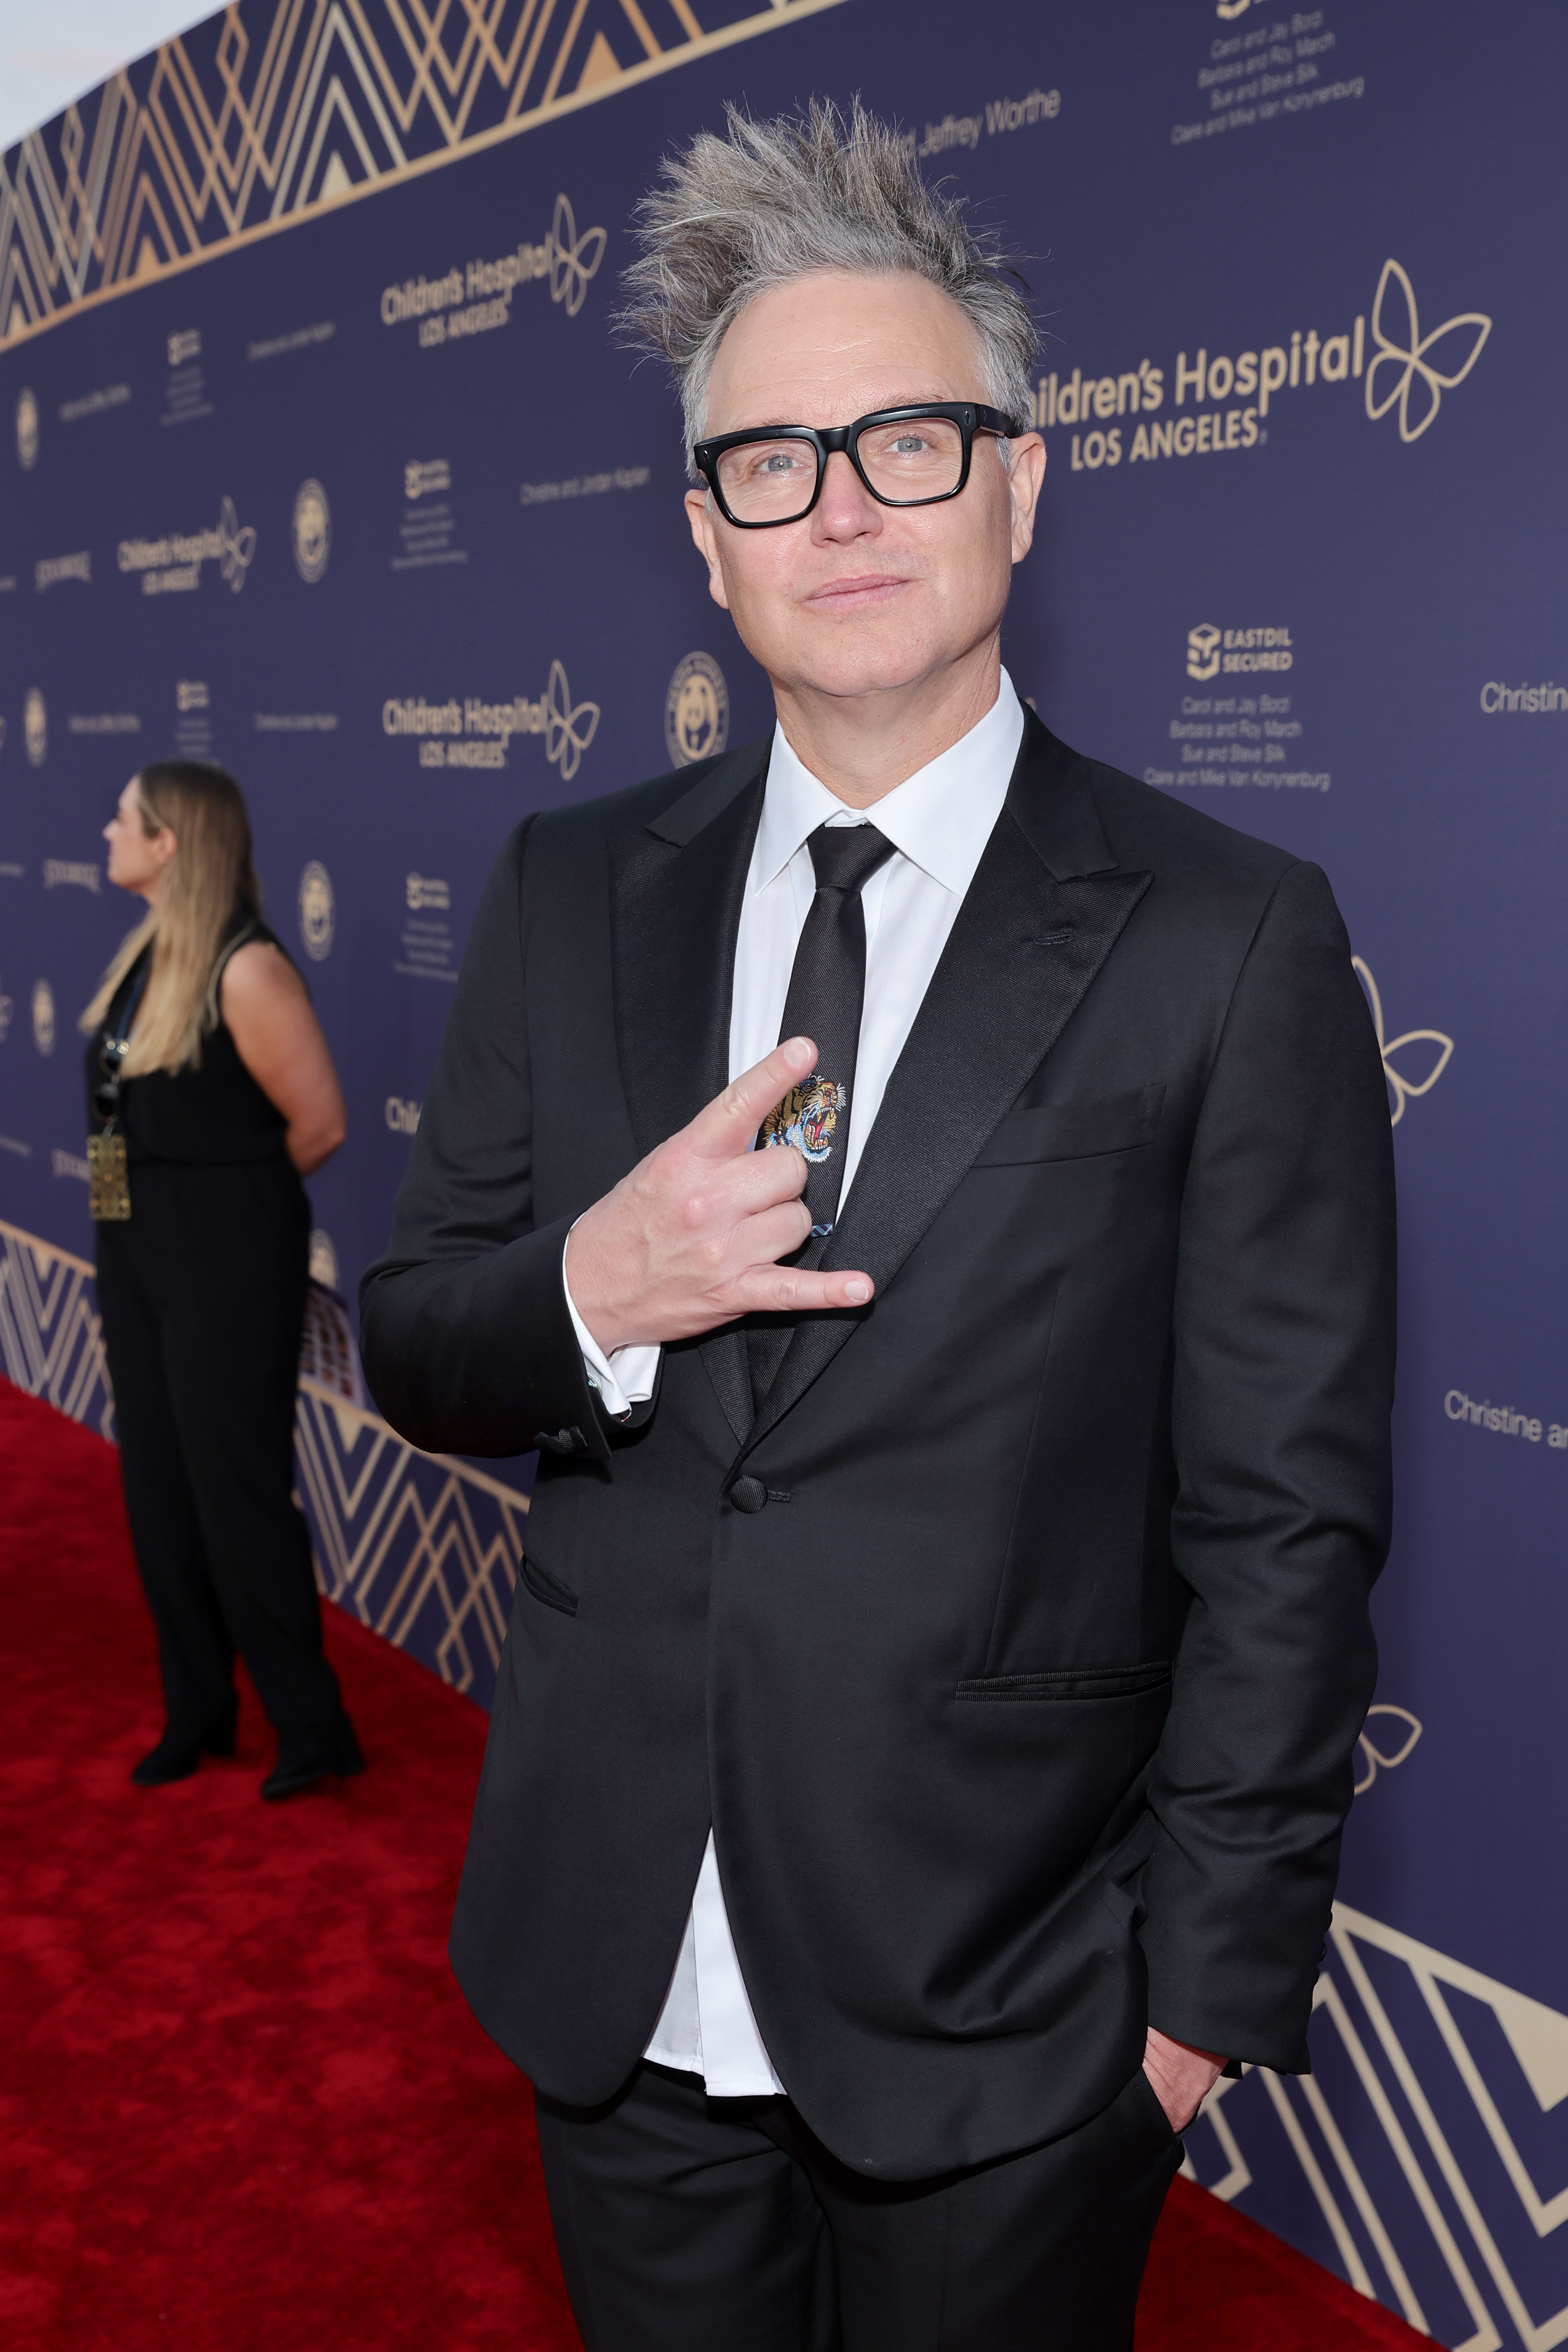 Person in a black suit and glasses posing with a peace sign on the red carpet